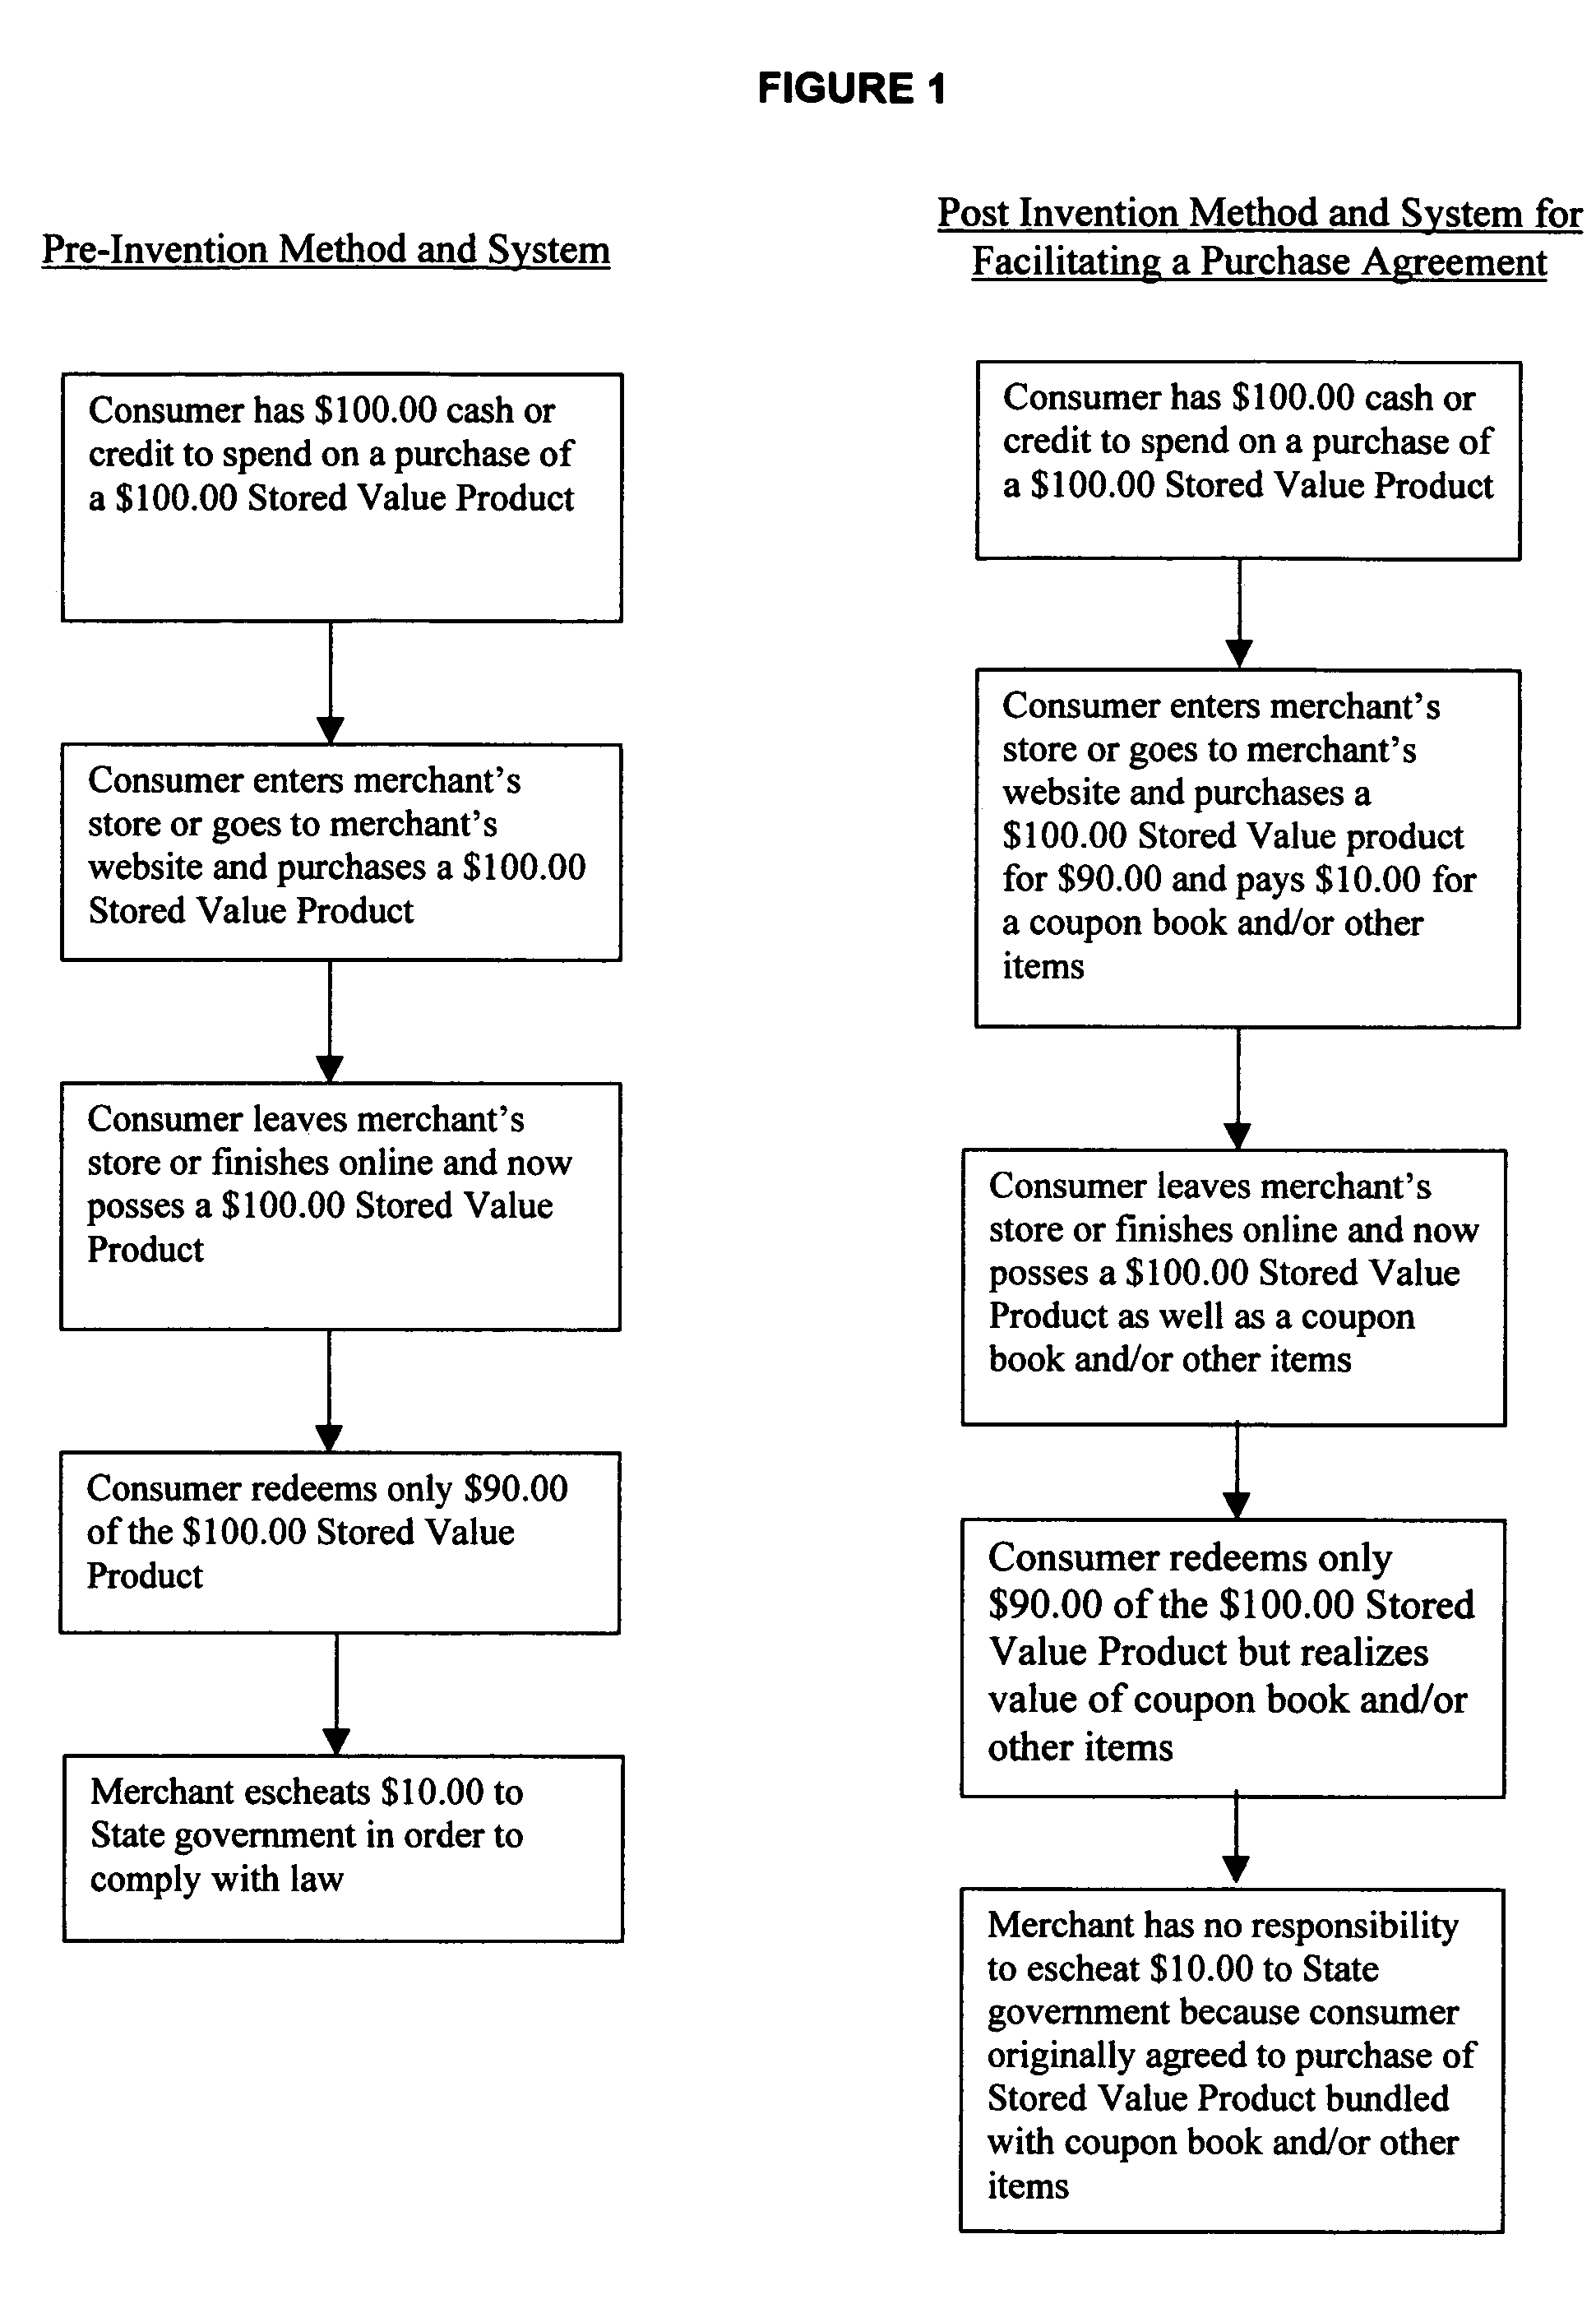 Method and system for facilitating a purchase agreement